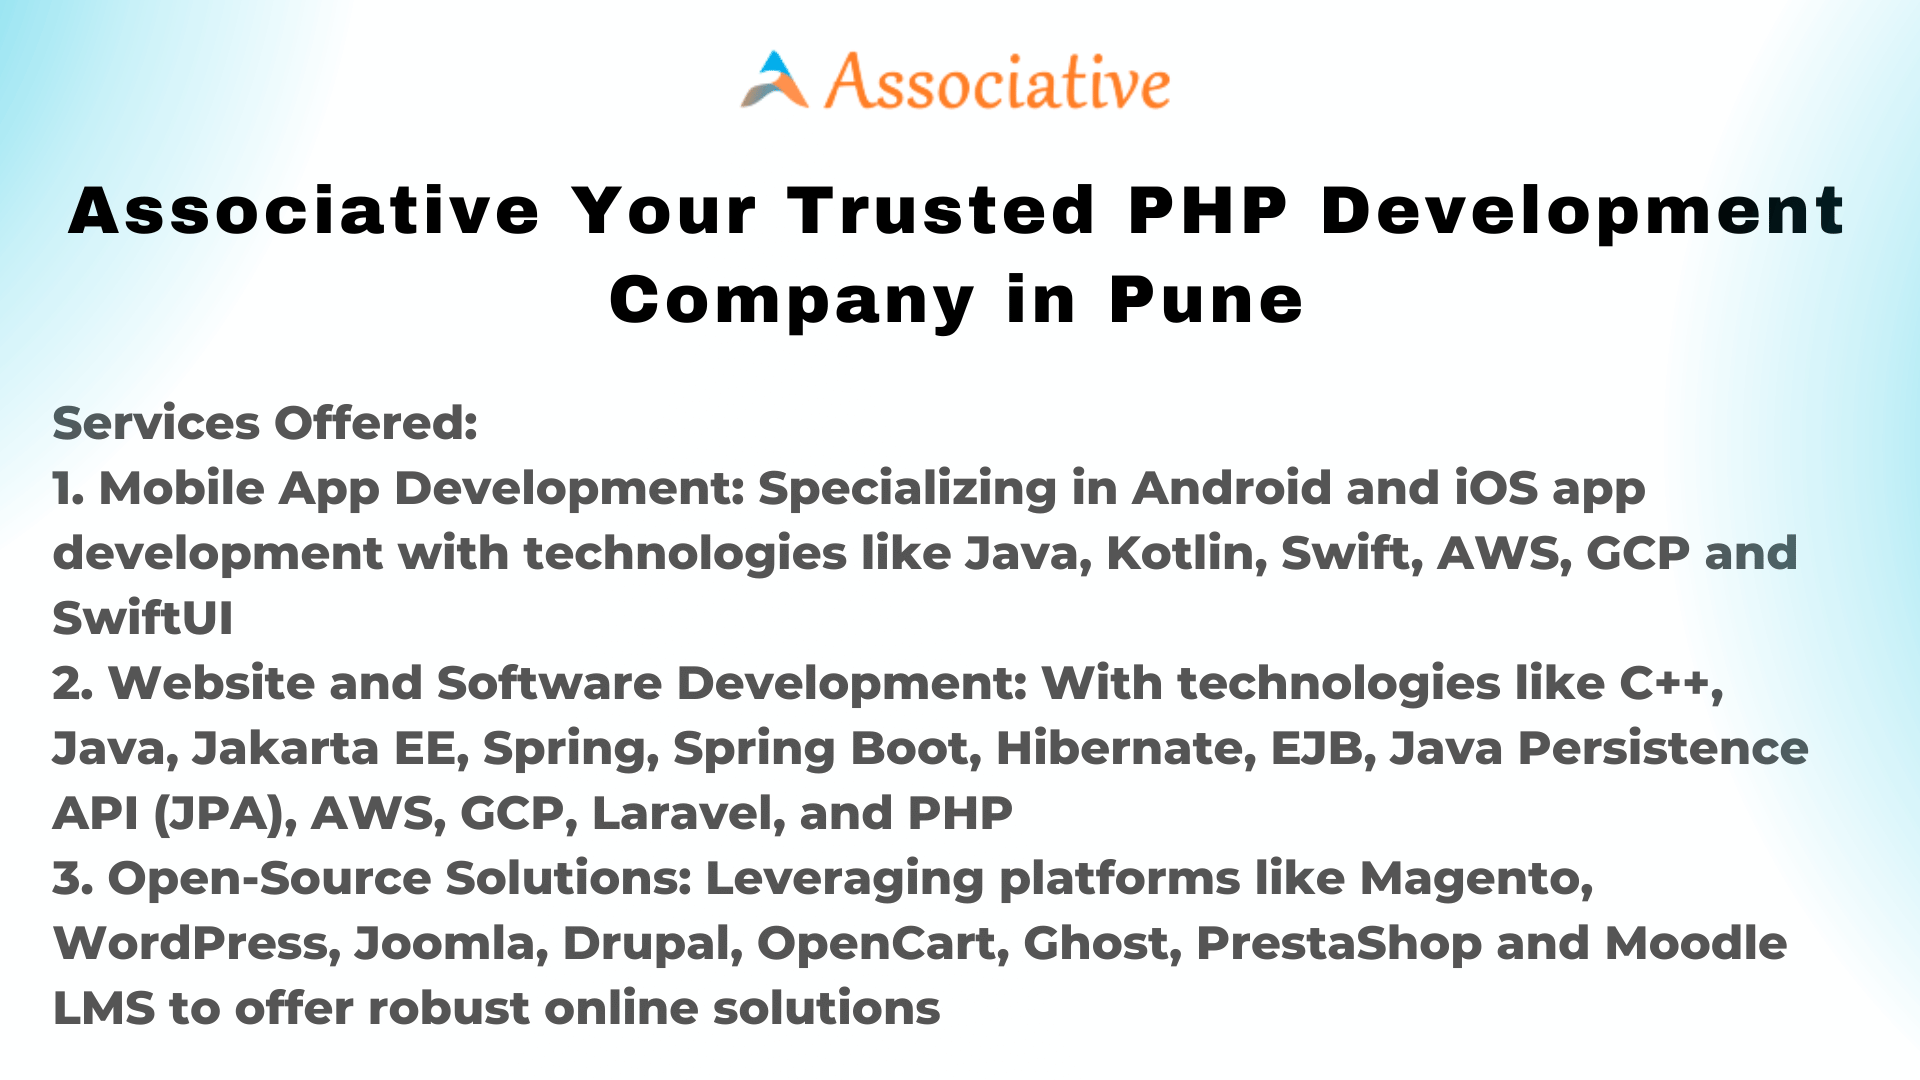 Associative Your Trusted PHP Development Company in Pune